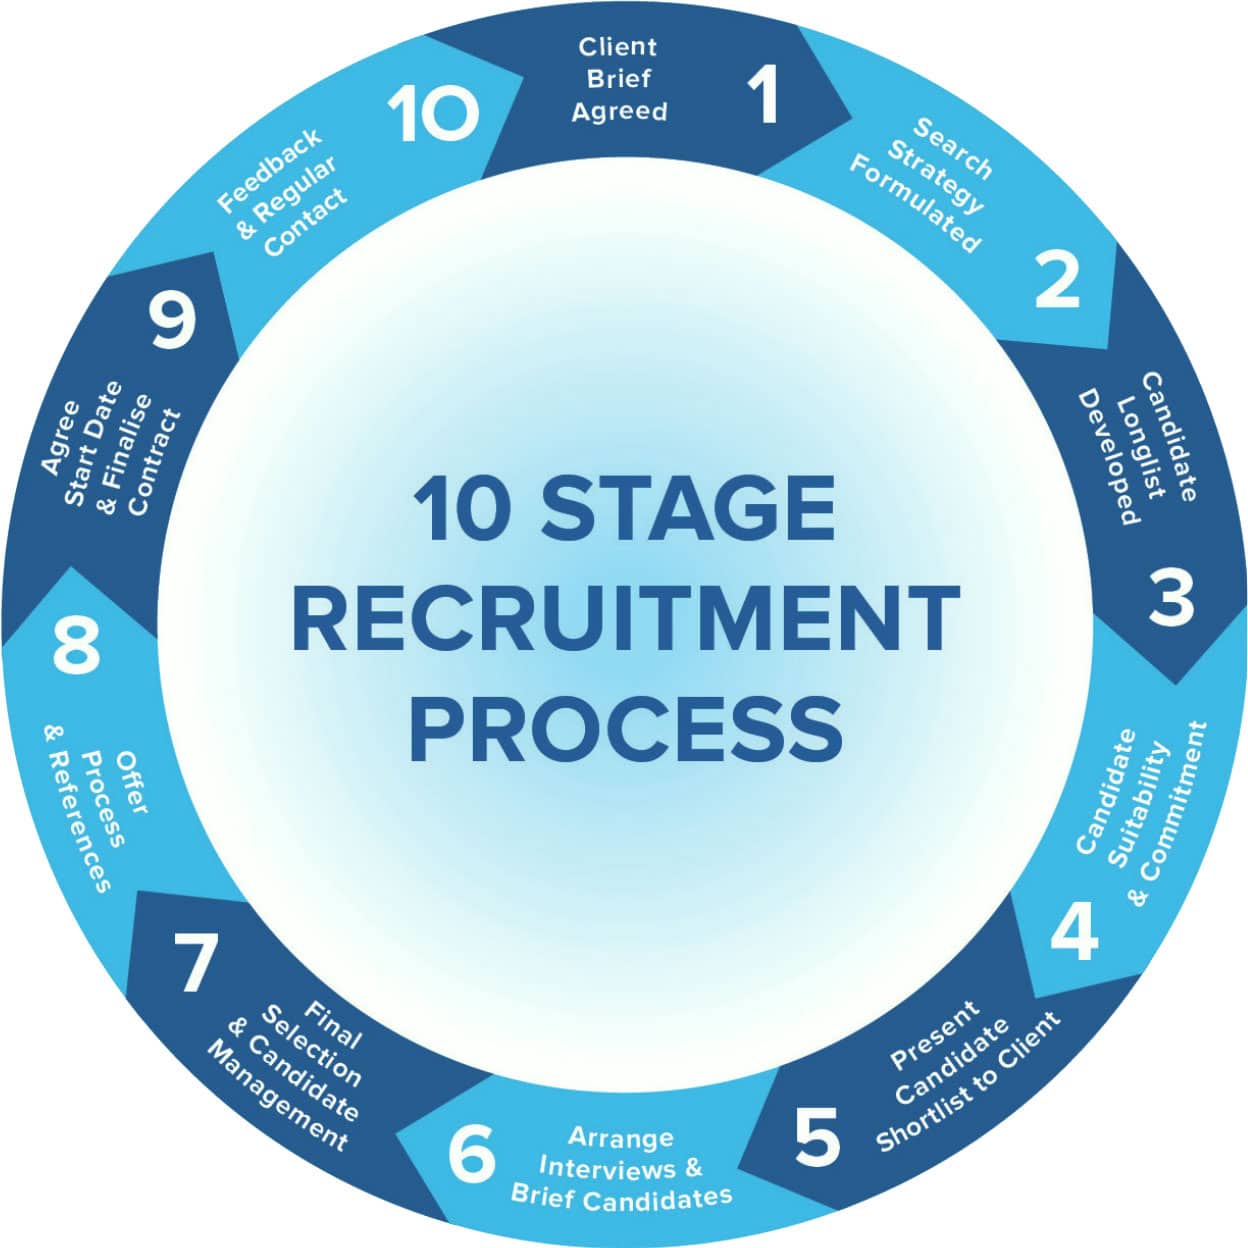 10 Stage Recruitment Process